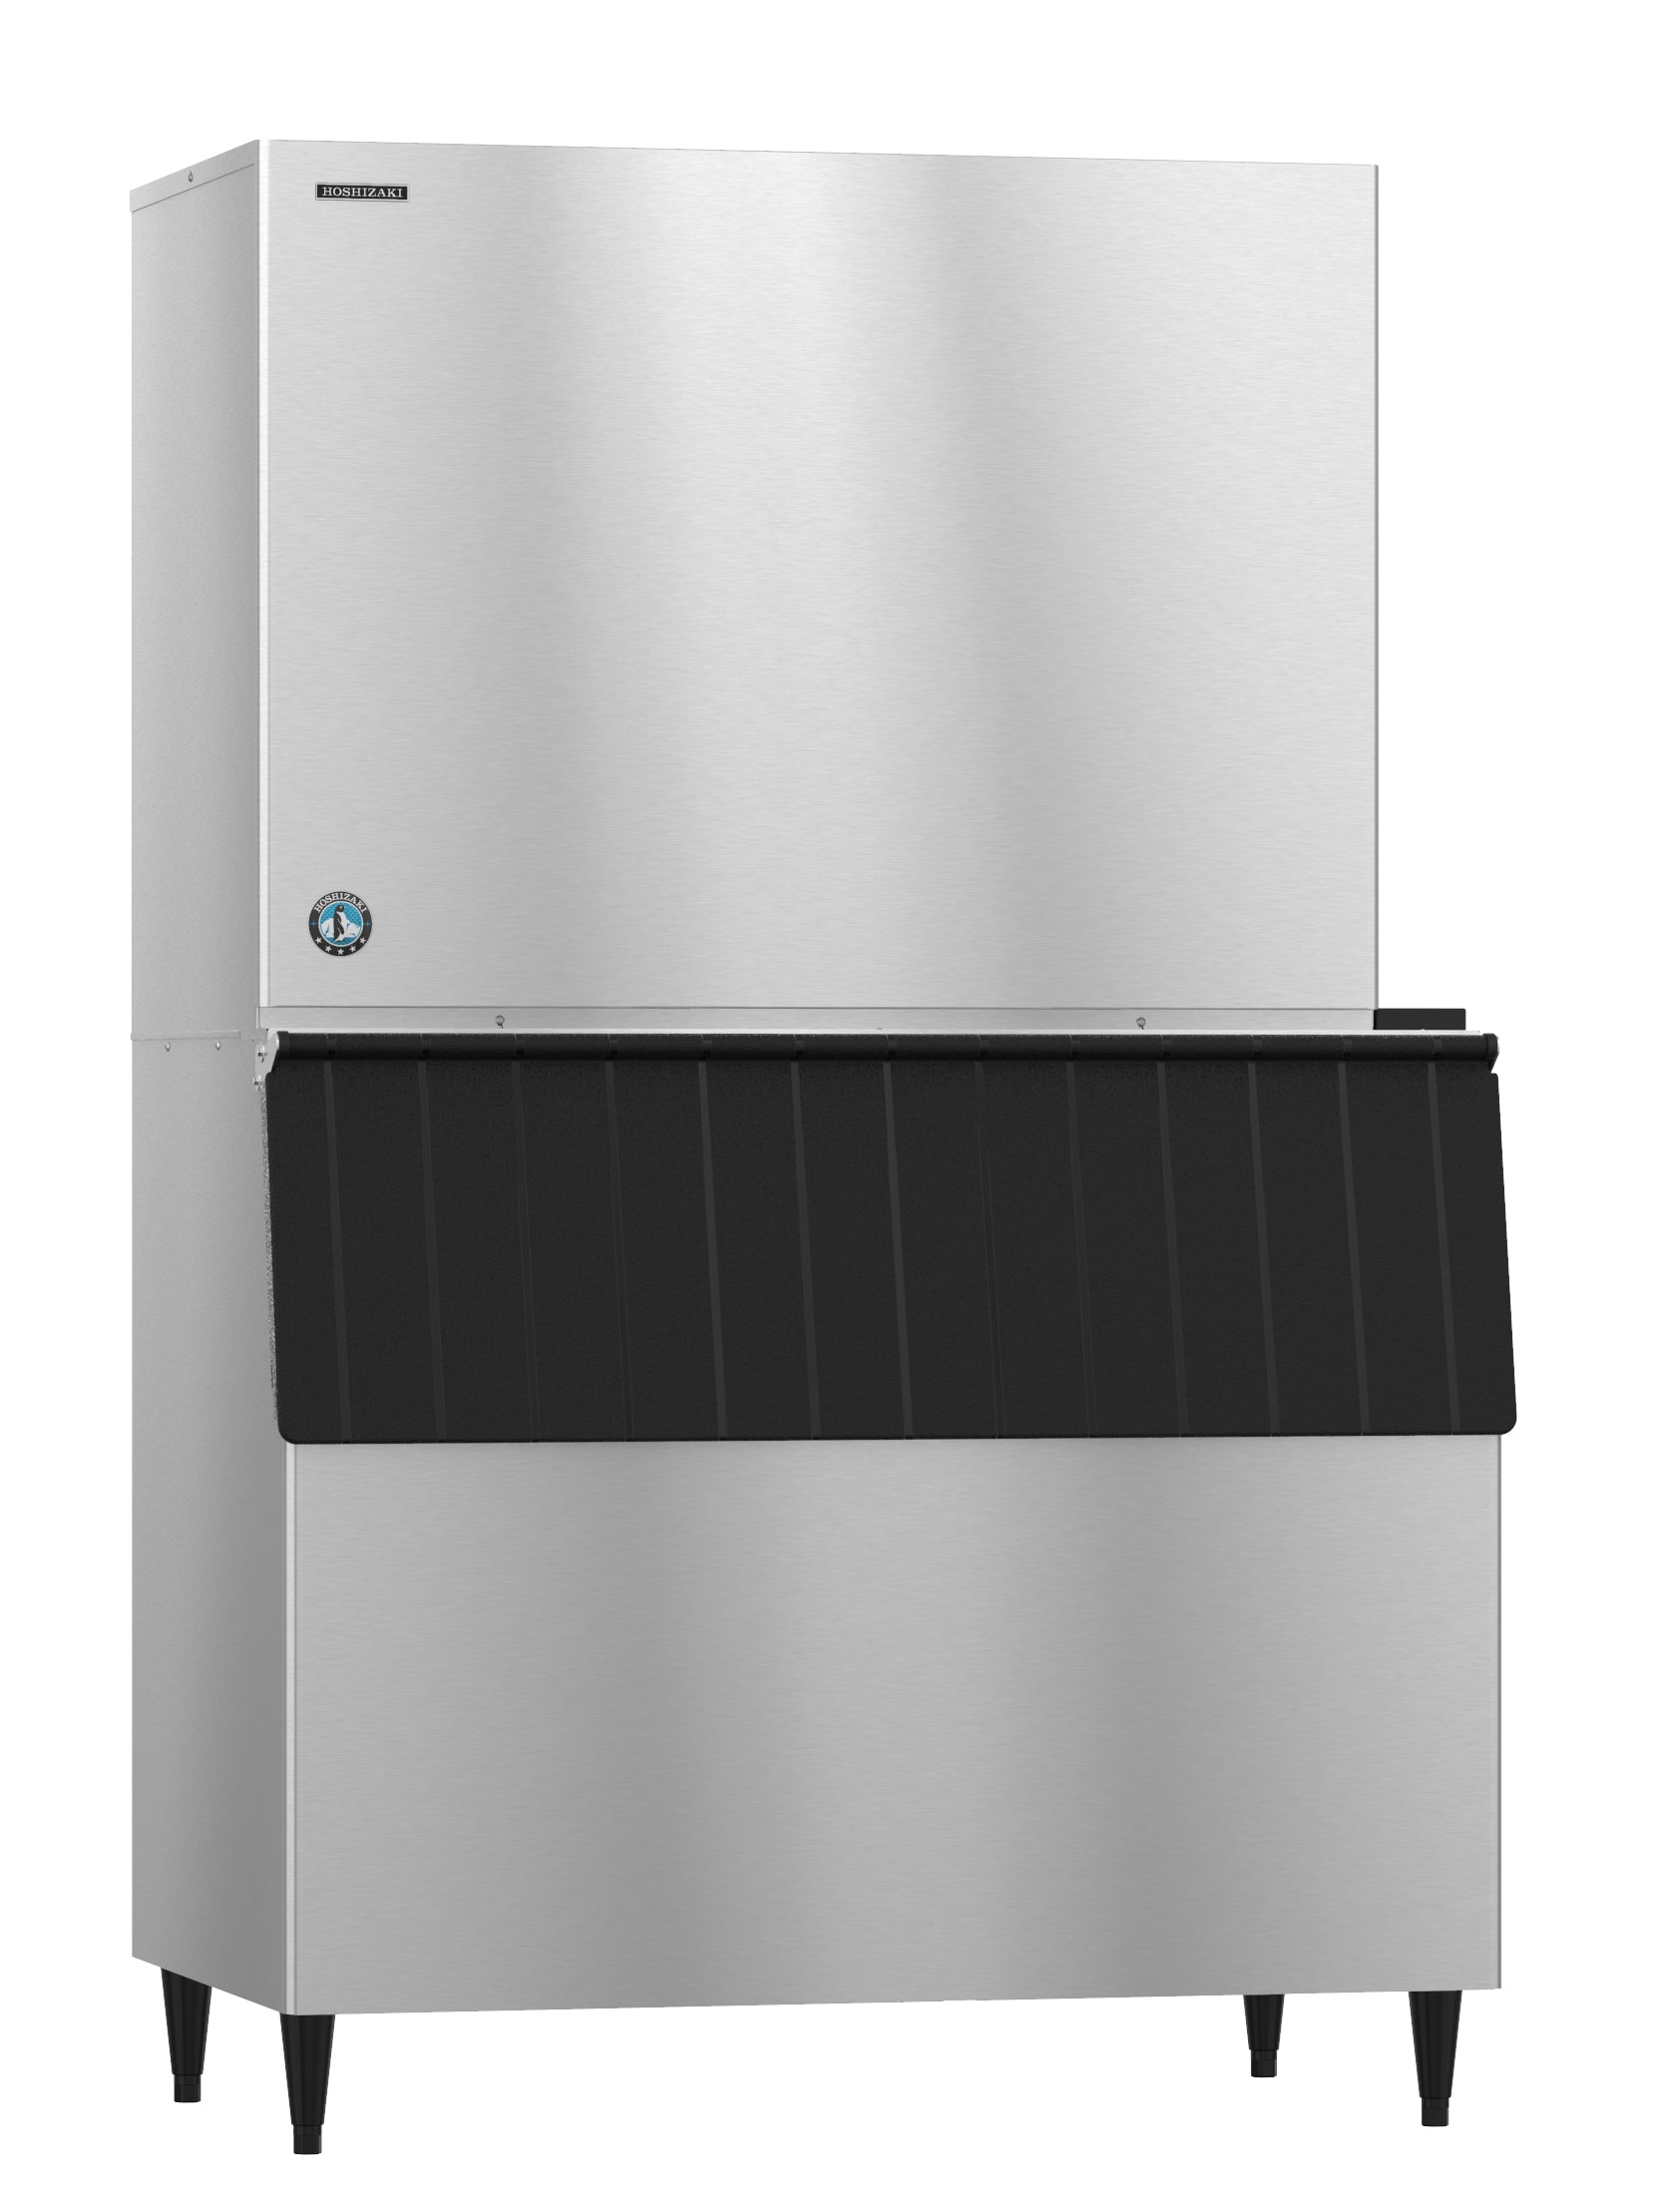 Hoshizaki KM-2600SWJ3 | 48" Wide 3 Phase Water-Cooled Crescent Cuber Ice Maker (Bin Sold Separately)